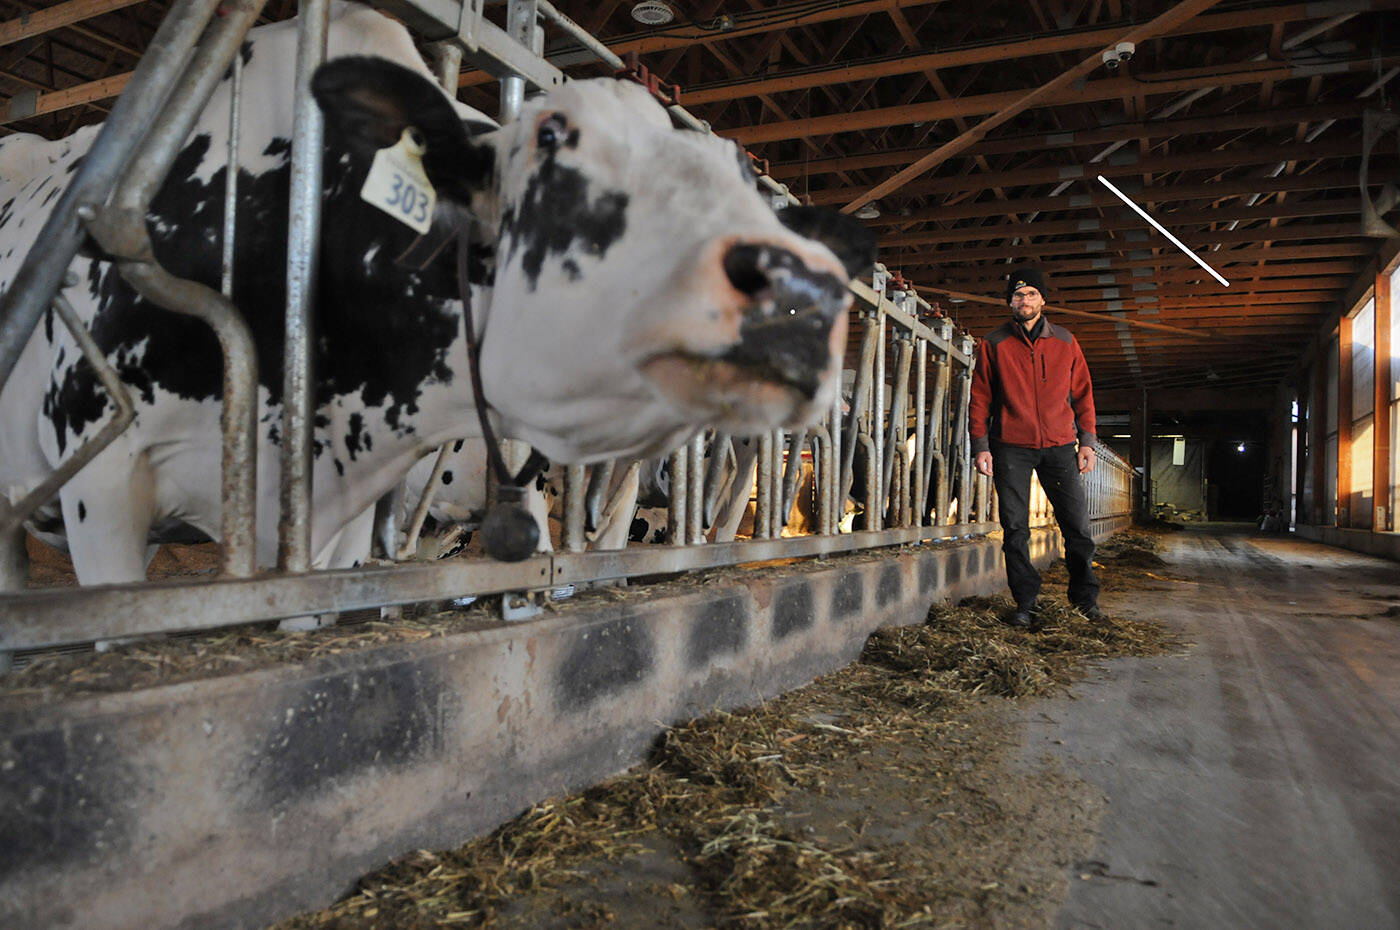 “There’s enough milk being dumped that would feed Chilliwack for a long time but it can’t be stored indefinitely and because there’s no transportation routes out, it’s a consequence of the flooding.,” said Matt Schmidt, owner of Gala Dairy in Chilliwack on Wednesday, Nov. 17, 2021. (Jenna Hauck/ Chilliwack Progress)